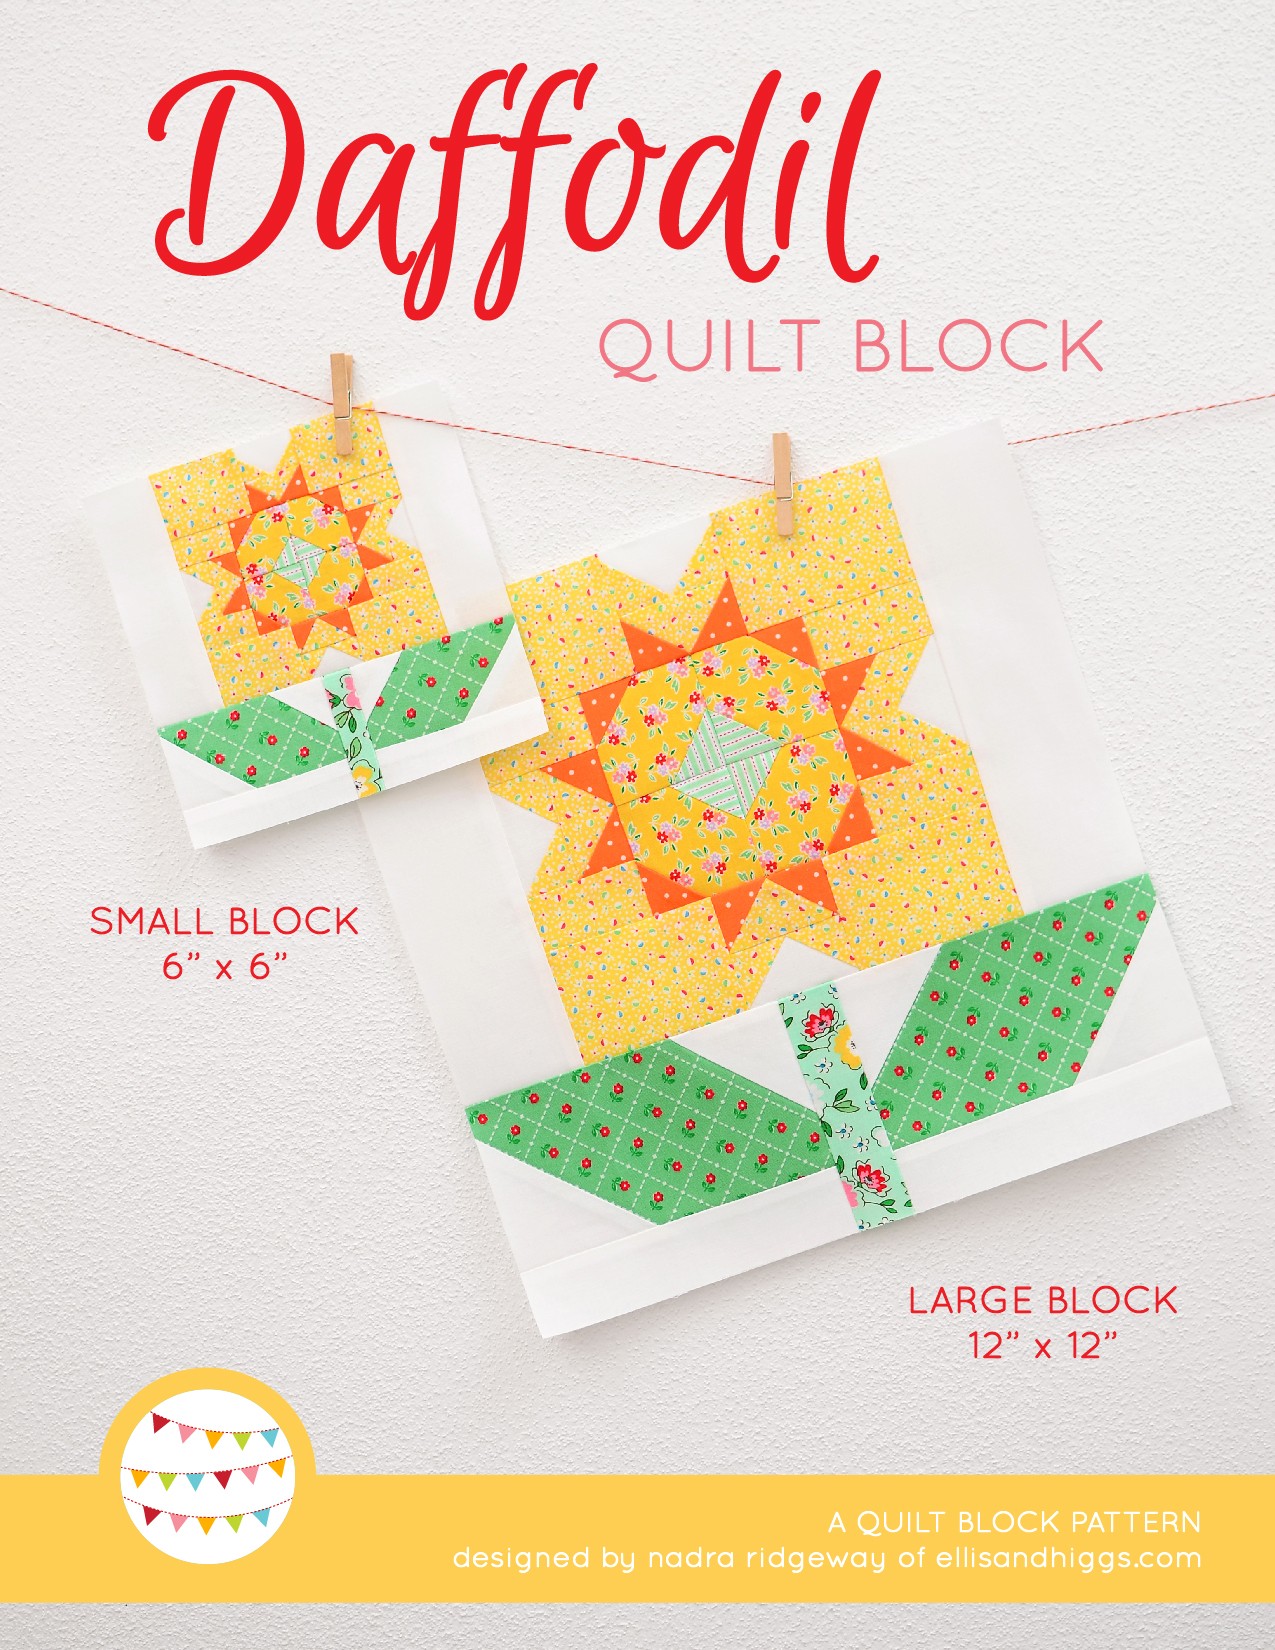 Daffodil Quilt Block - Easter Quilt Pattern